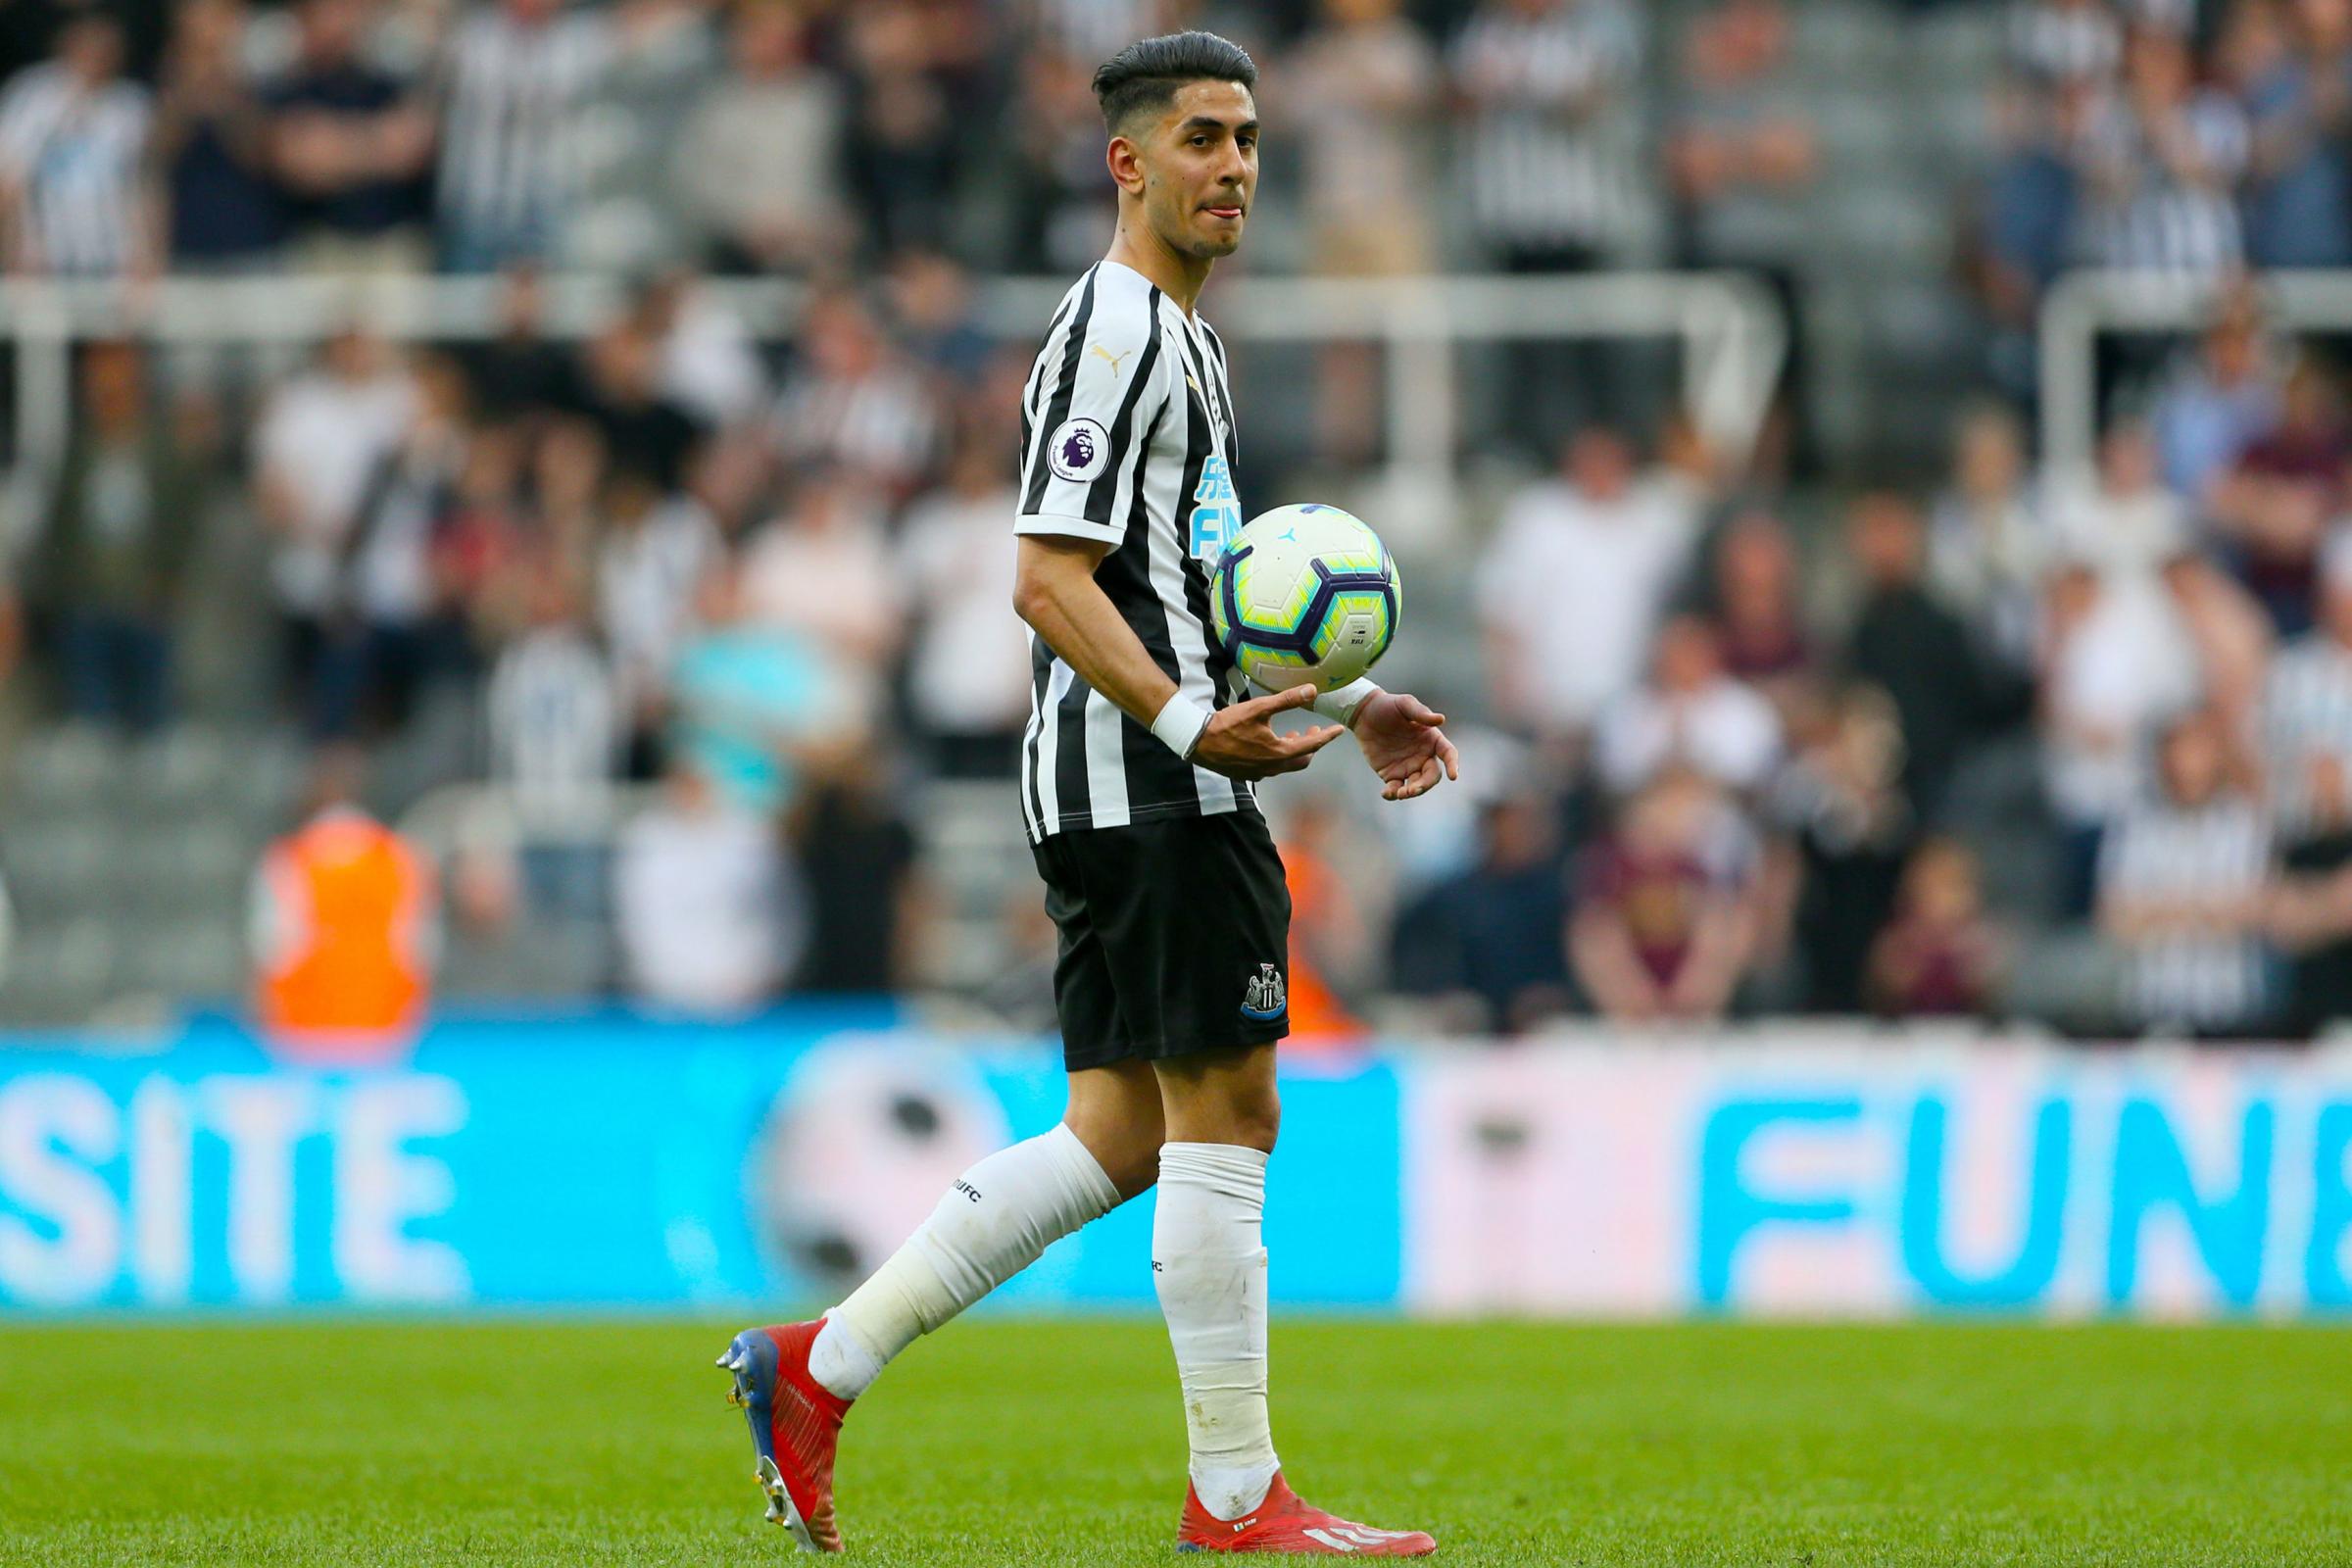 Inter Milan will make early summer move for Newcastle forward Perez